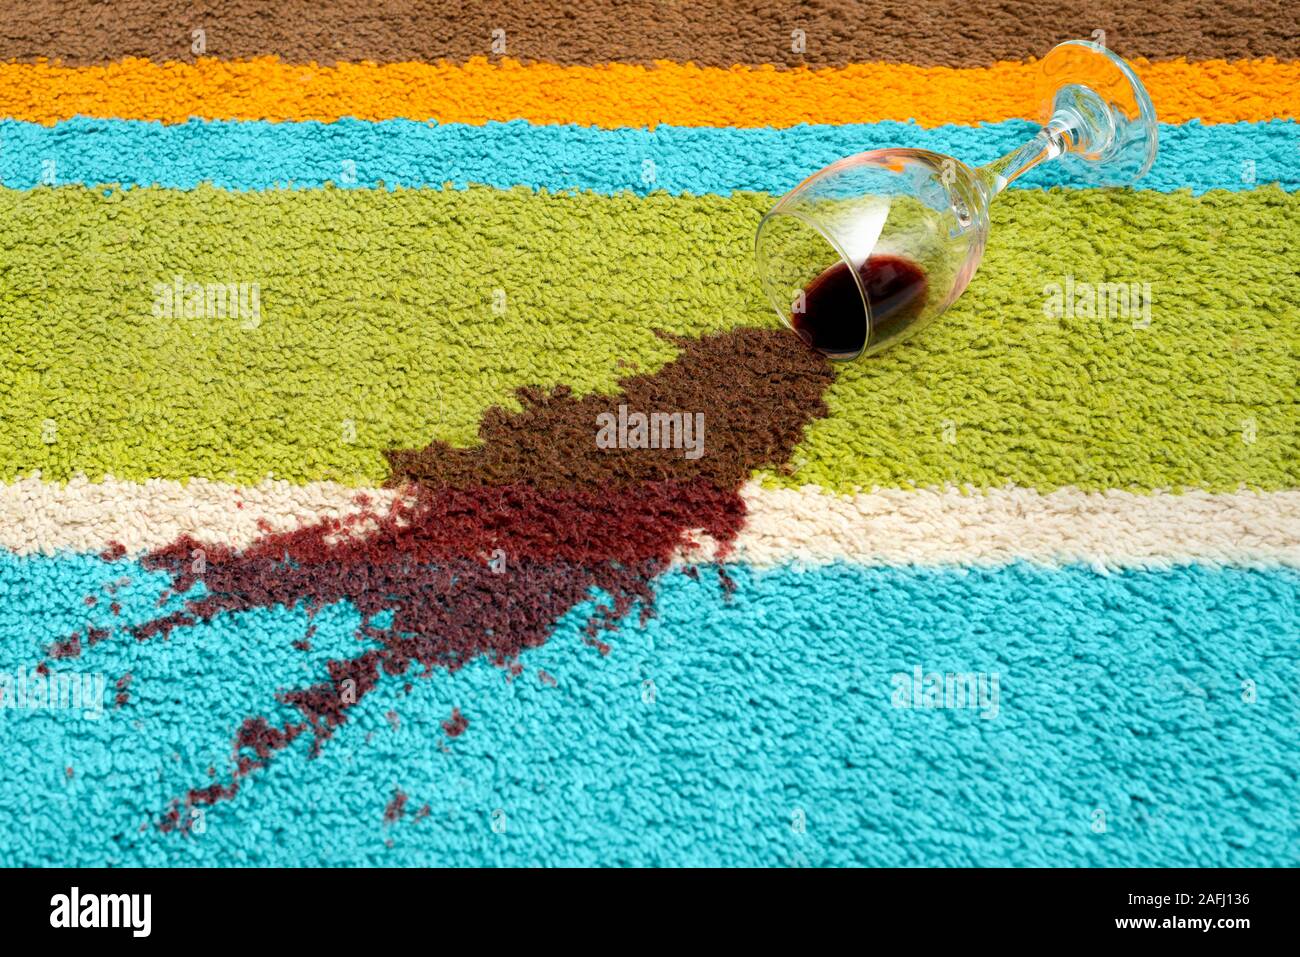 Spill of red wine over the carpet Stock Photo